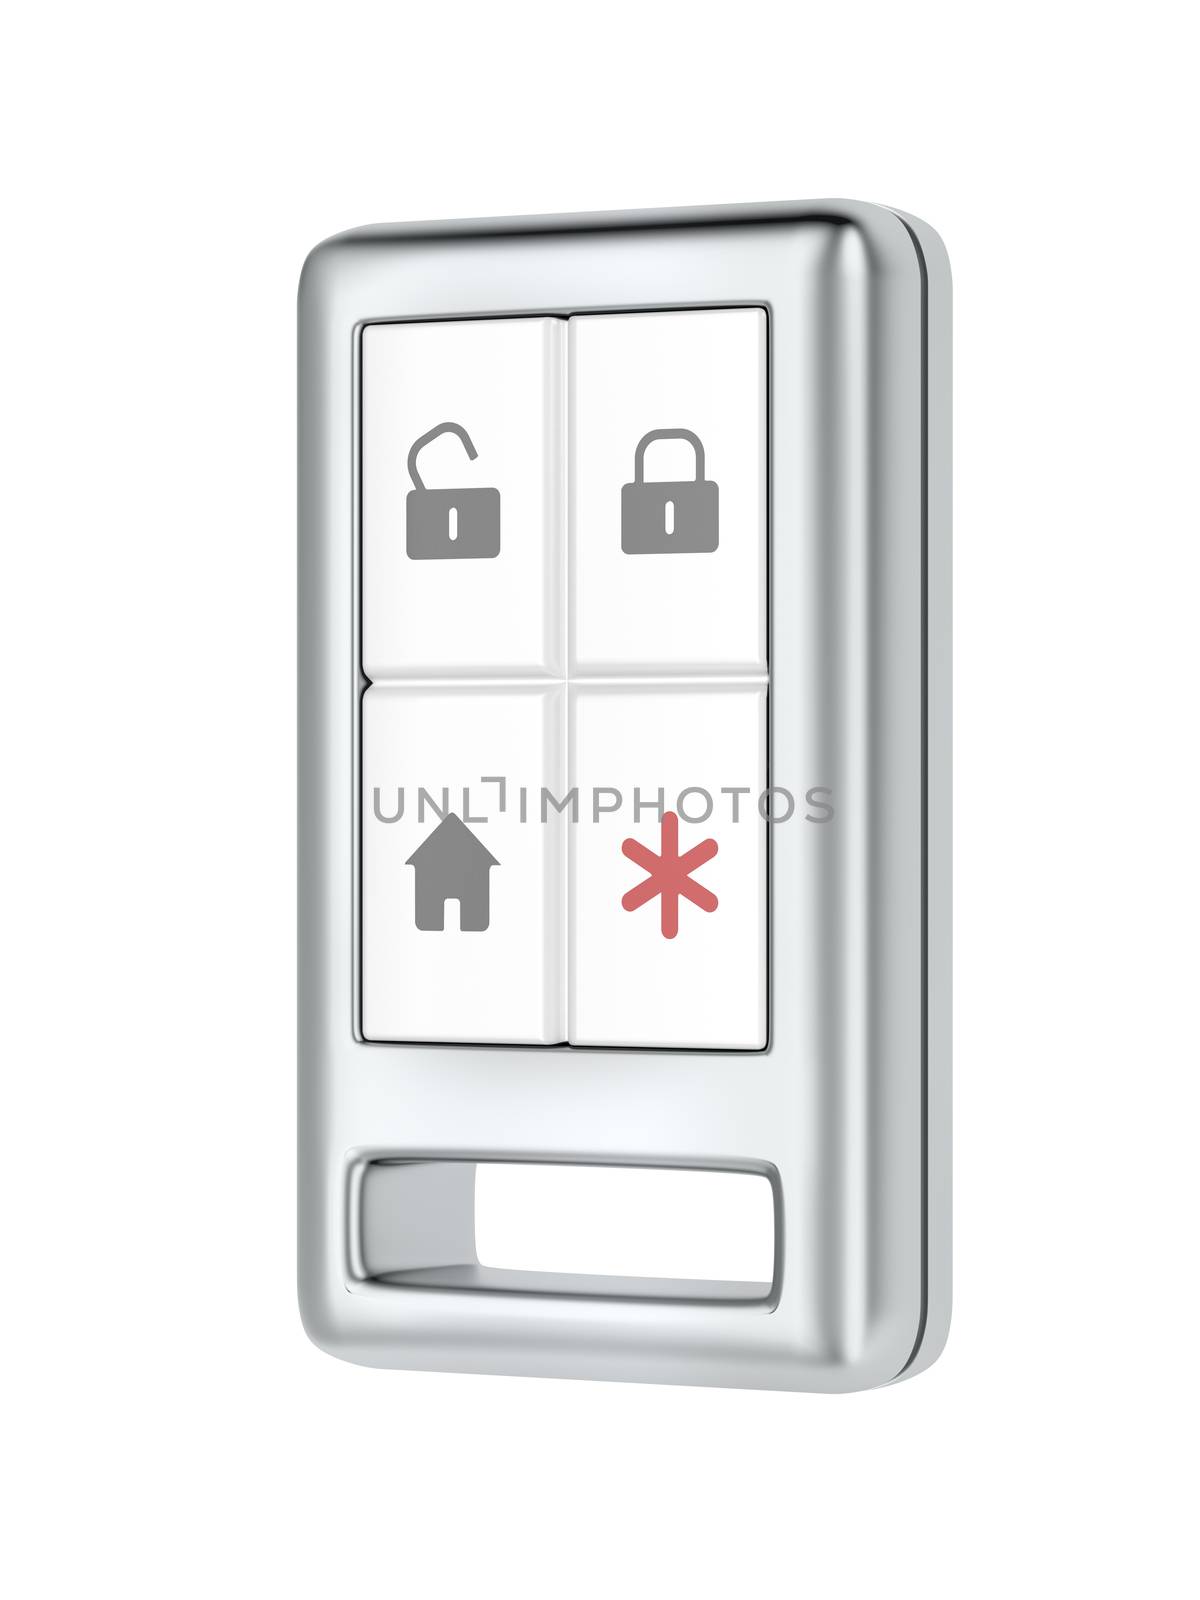 Remote control for the home alarm system by magraphics